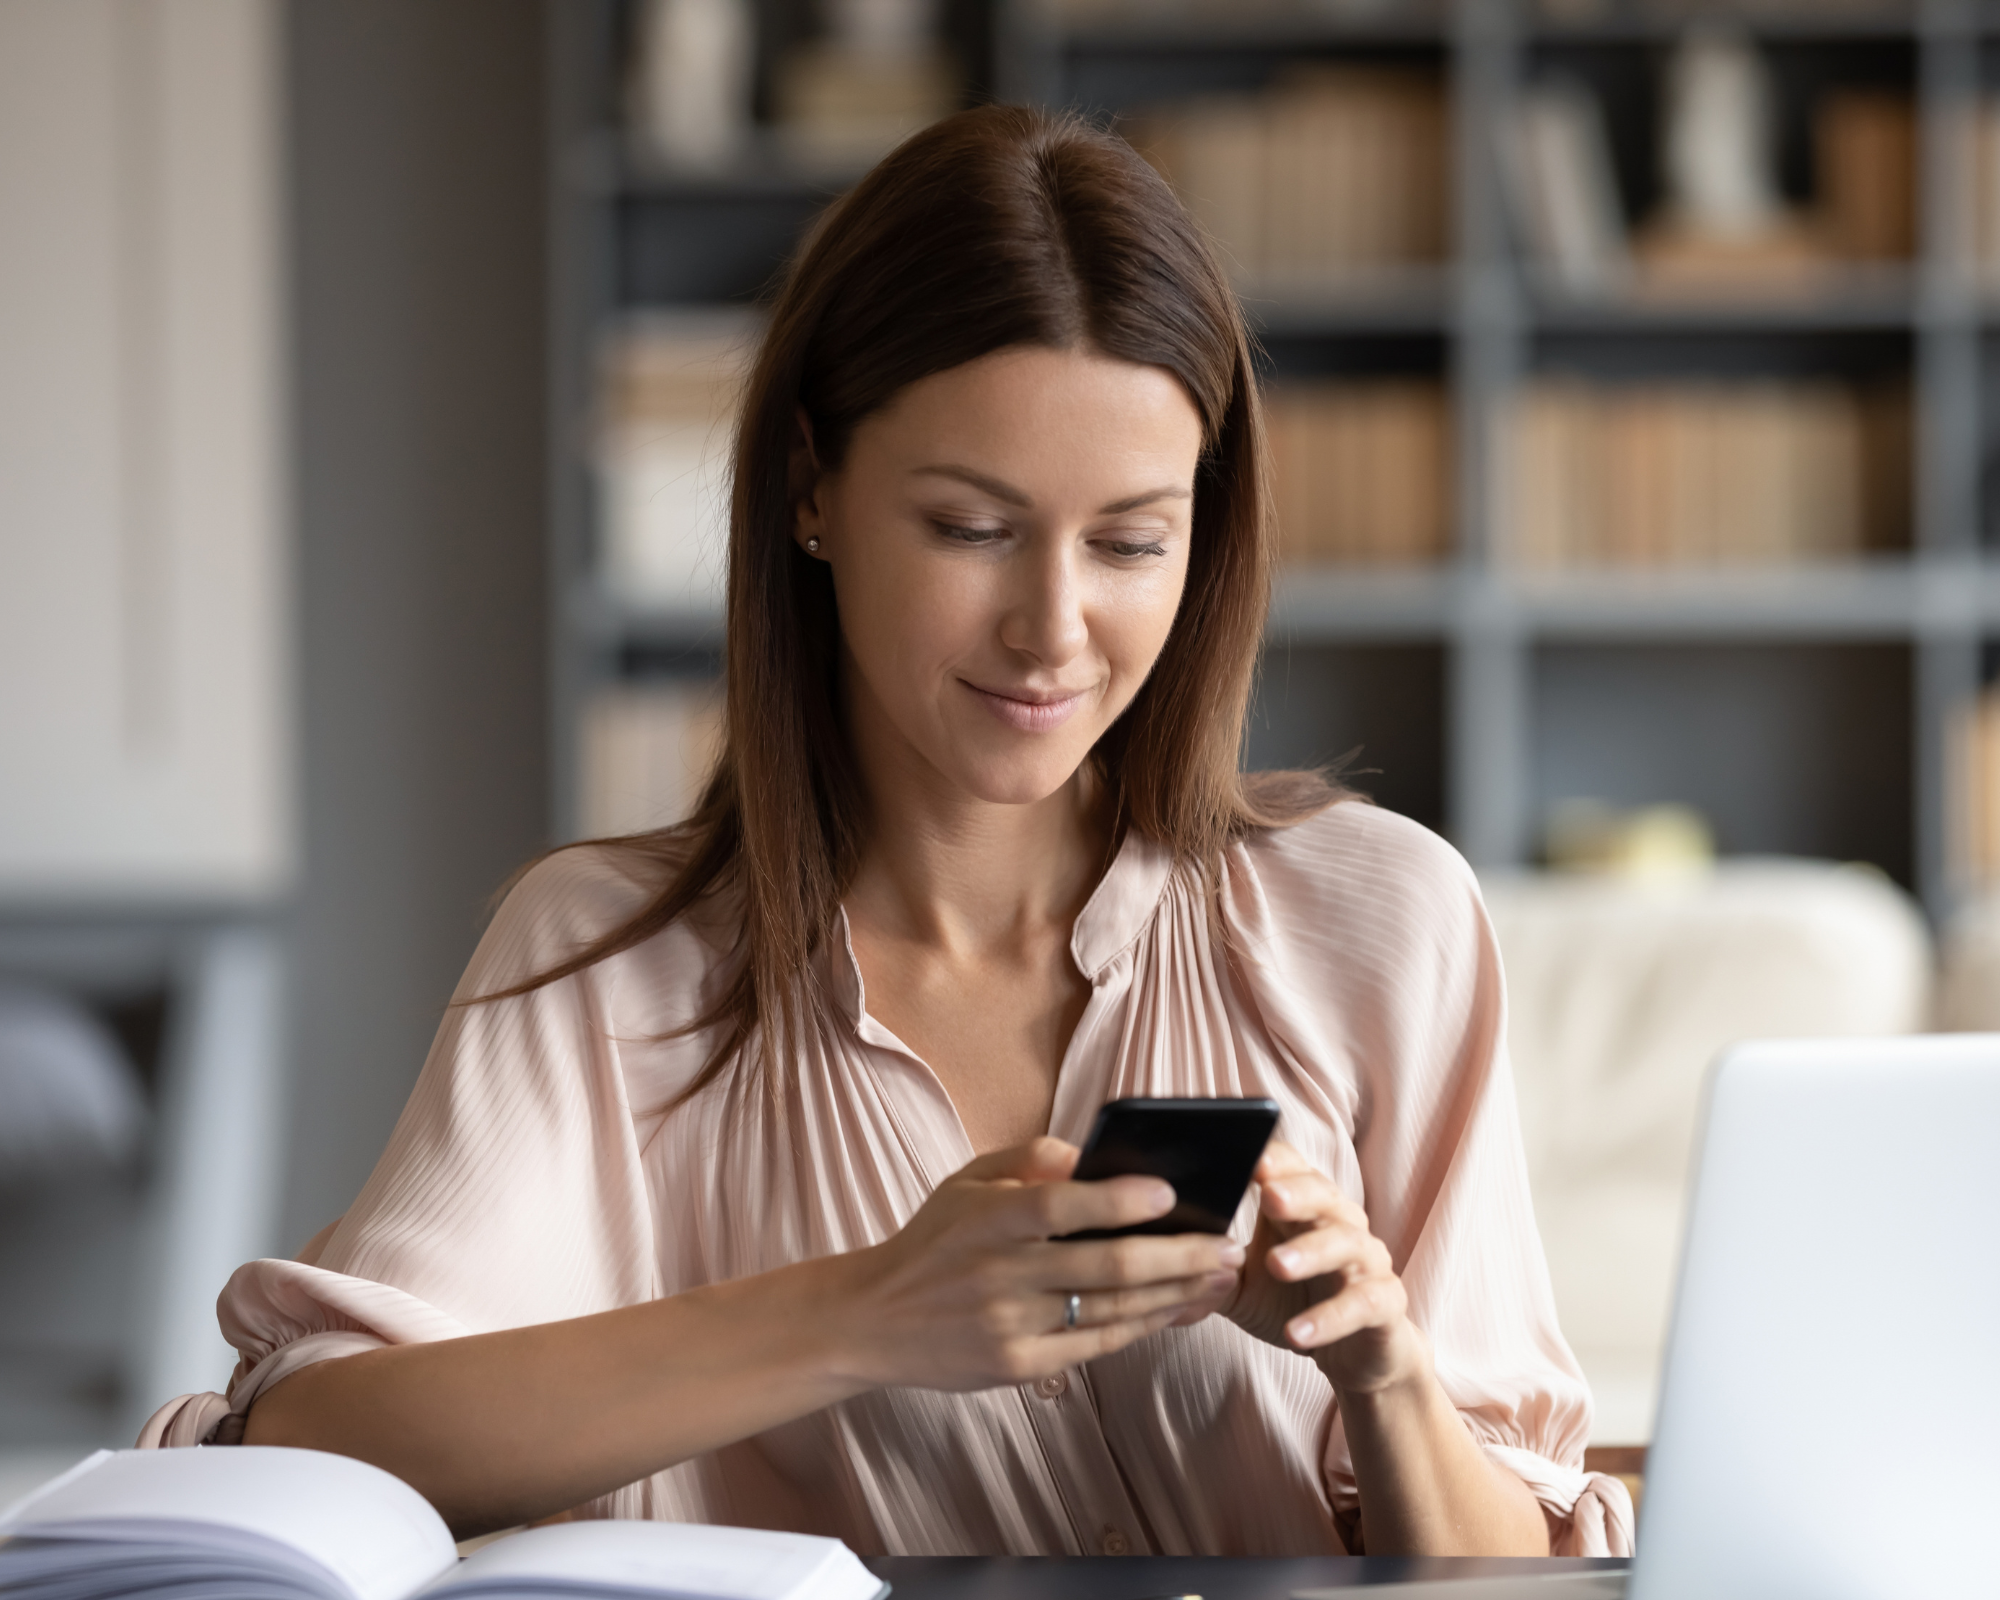 Woman sitting on couch, looking at her cellphone in her hand: all-year-round business ideas